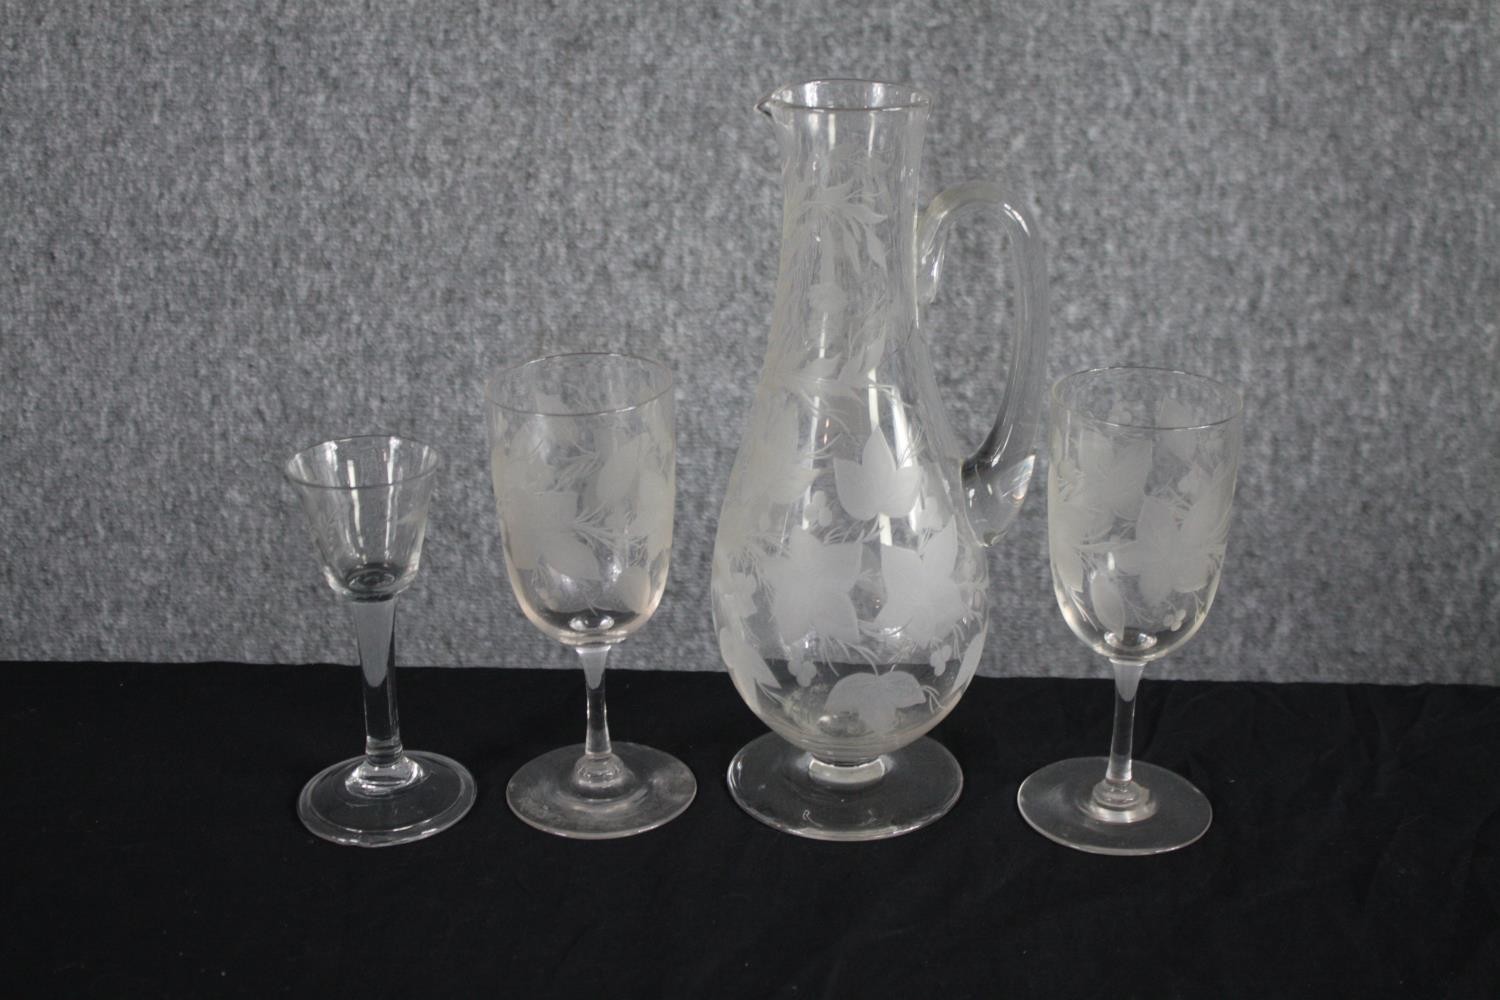 Two etched Victorian wine glasses with etched foliate and fruit design with a matching wine jug